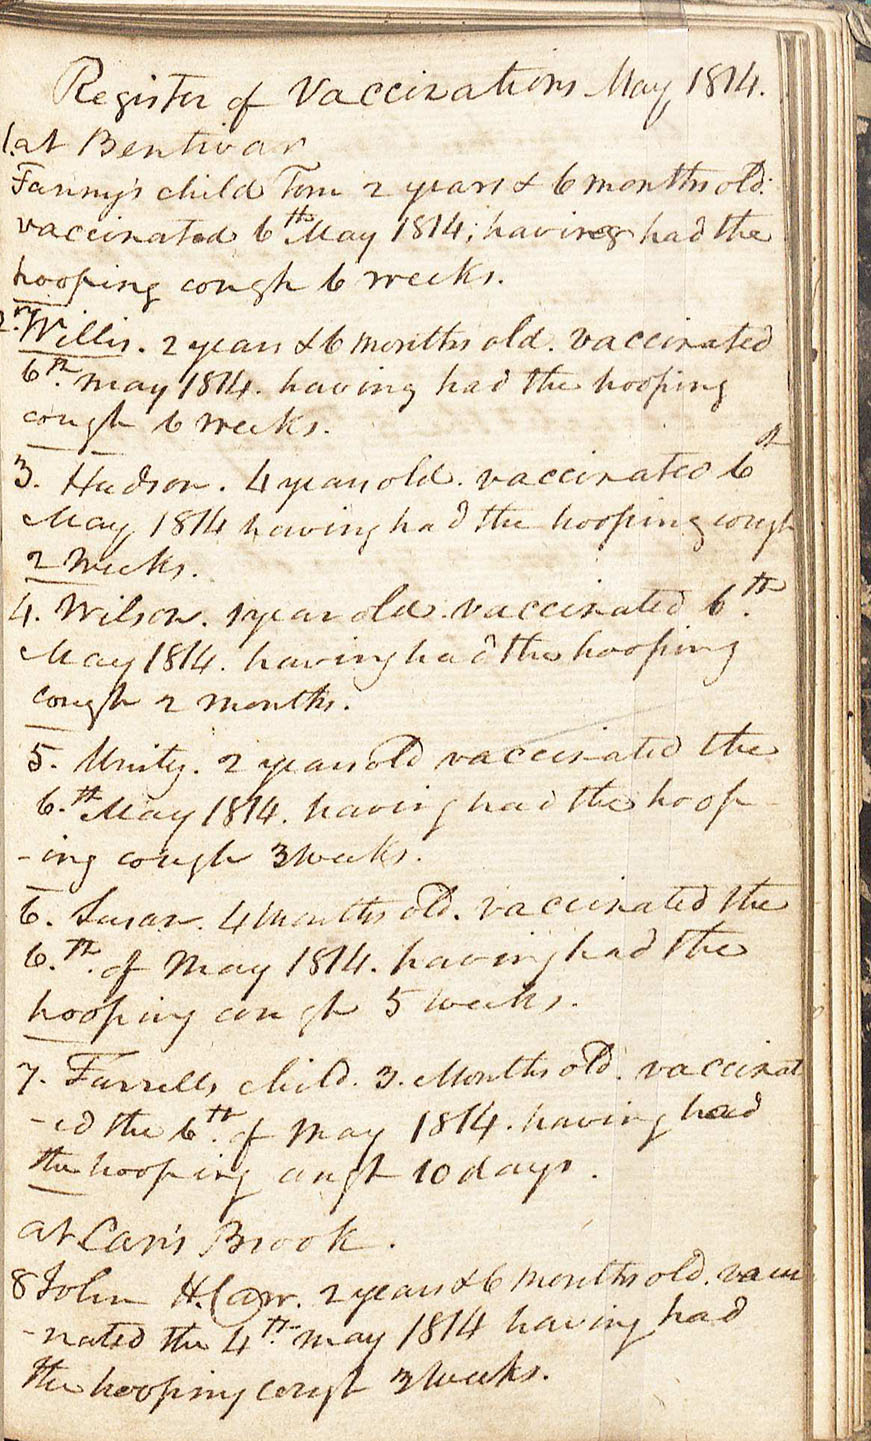 Frank Carr's Journal and Commonplace Book, 1810-1838 (MSS 15444)  C. Venable Minor Endowment Fund, 2012/2013. This is the personal journal of Frank Carr, which includes a register of vaccinations during May, 1814 and an extensive description of a man’s case of hydrophobia.  